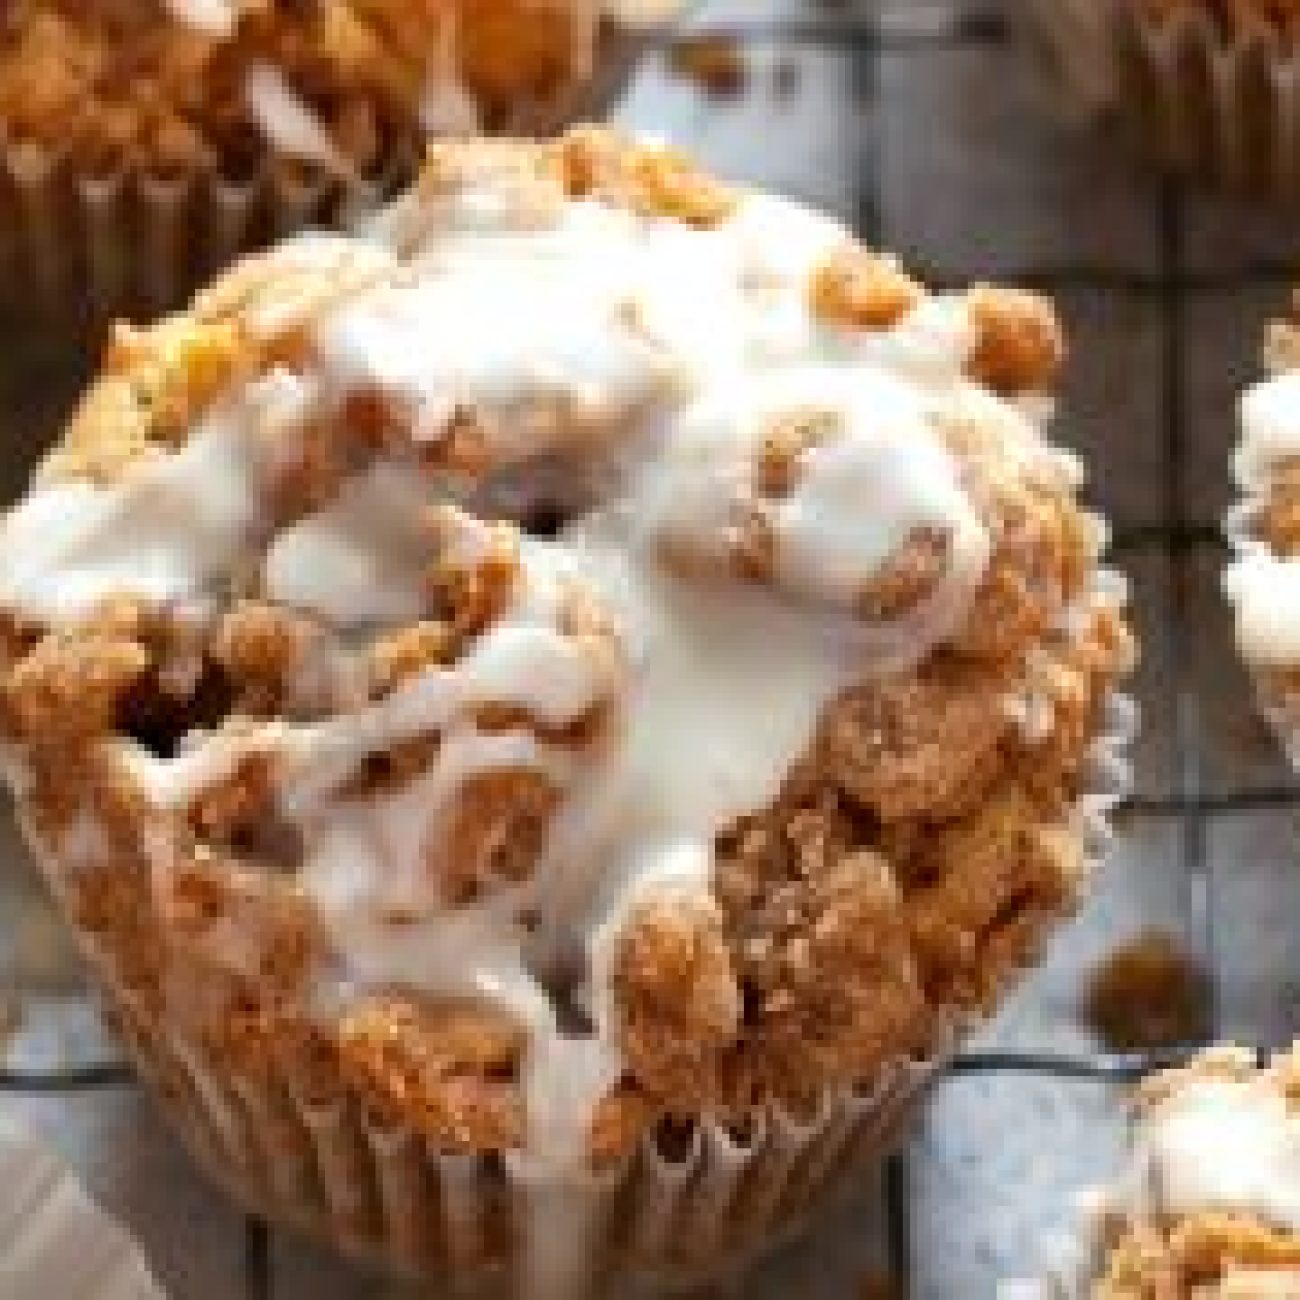 Apple Cinnamon Muffins With Crumble Topping